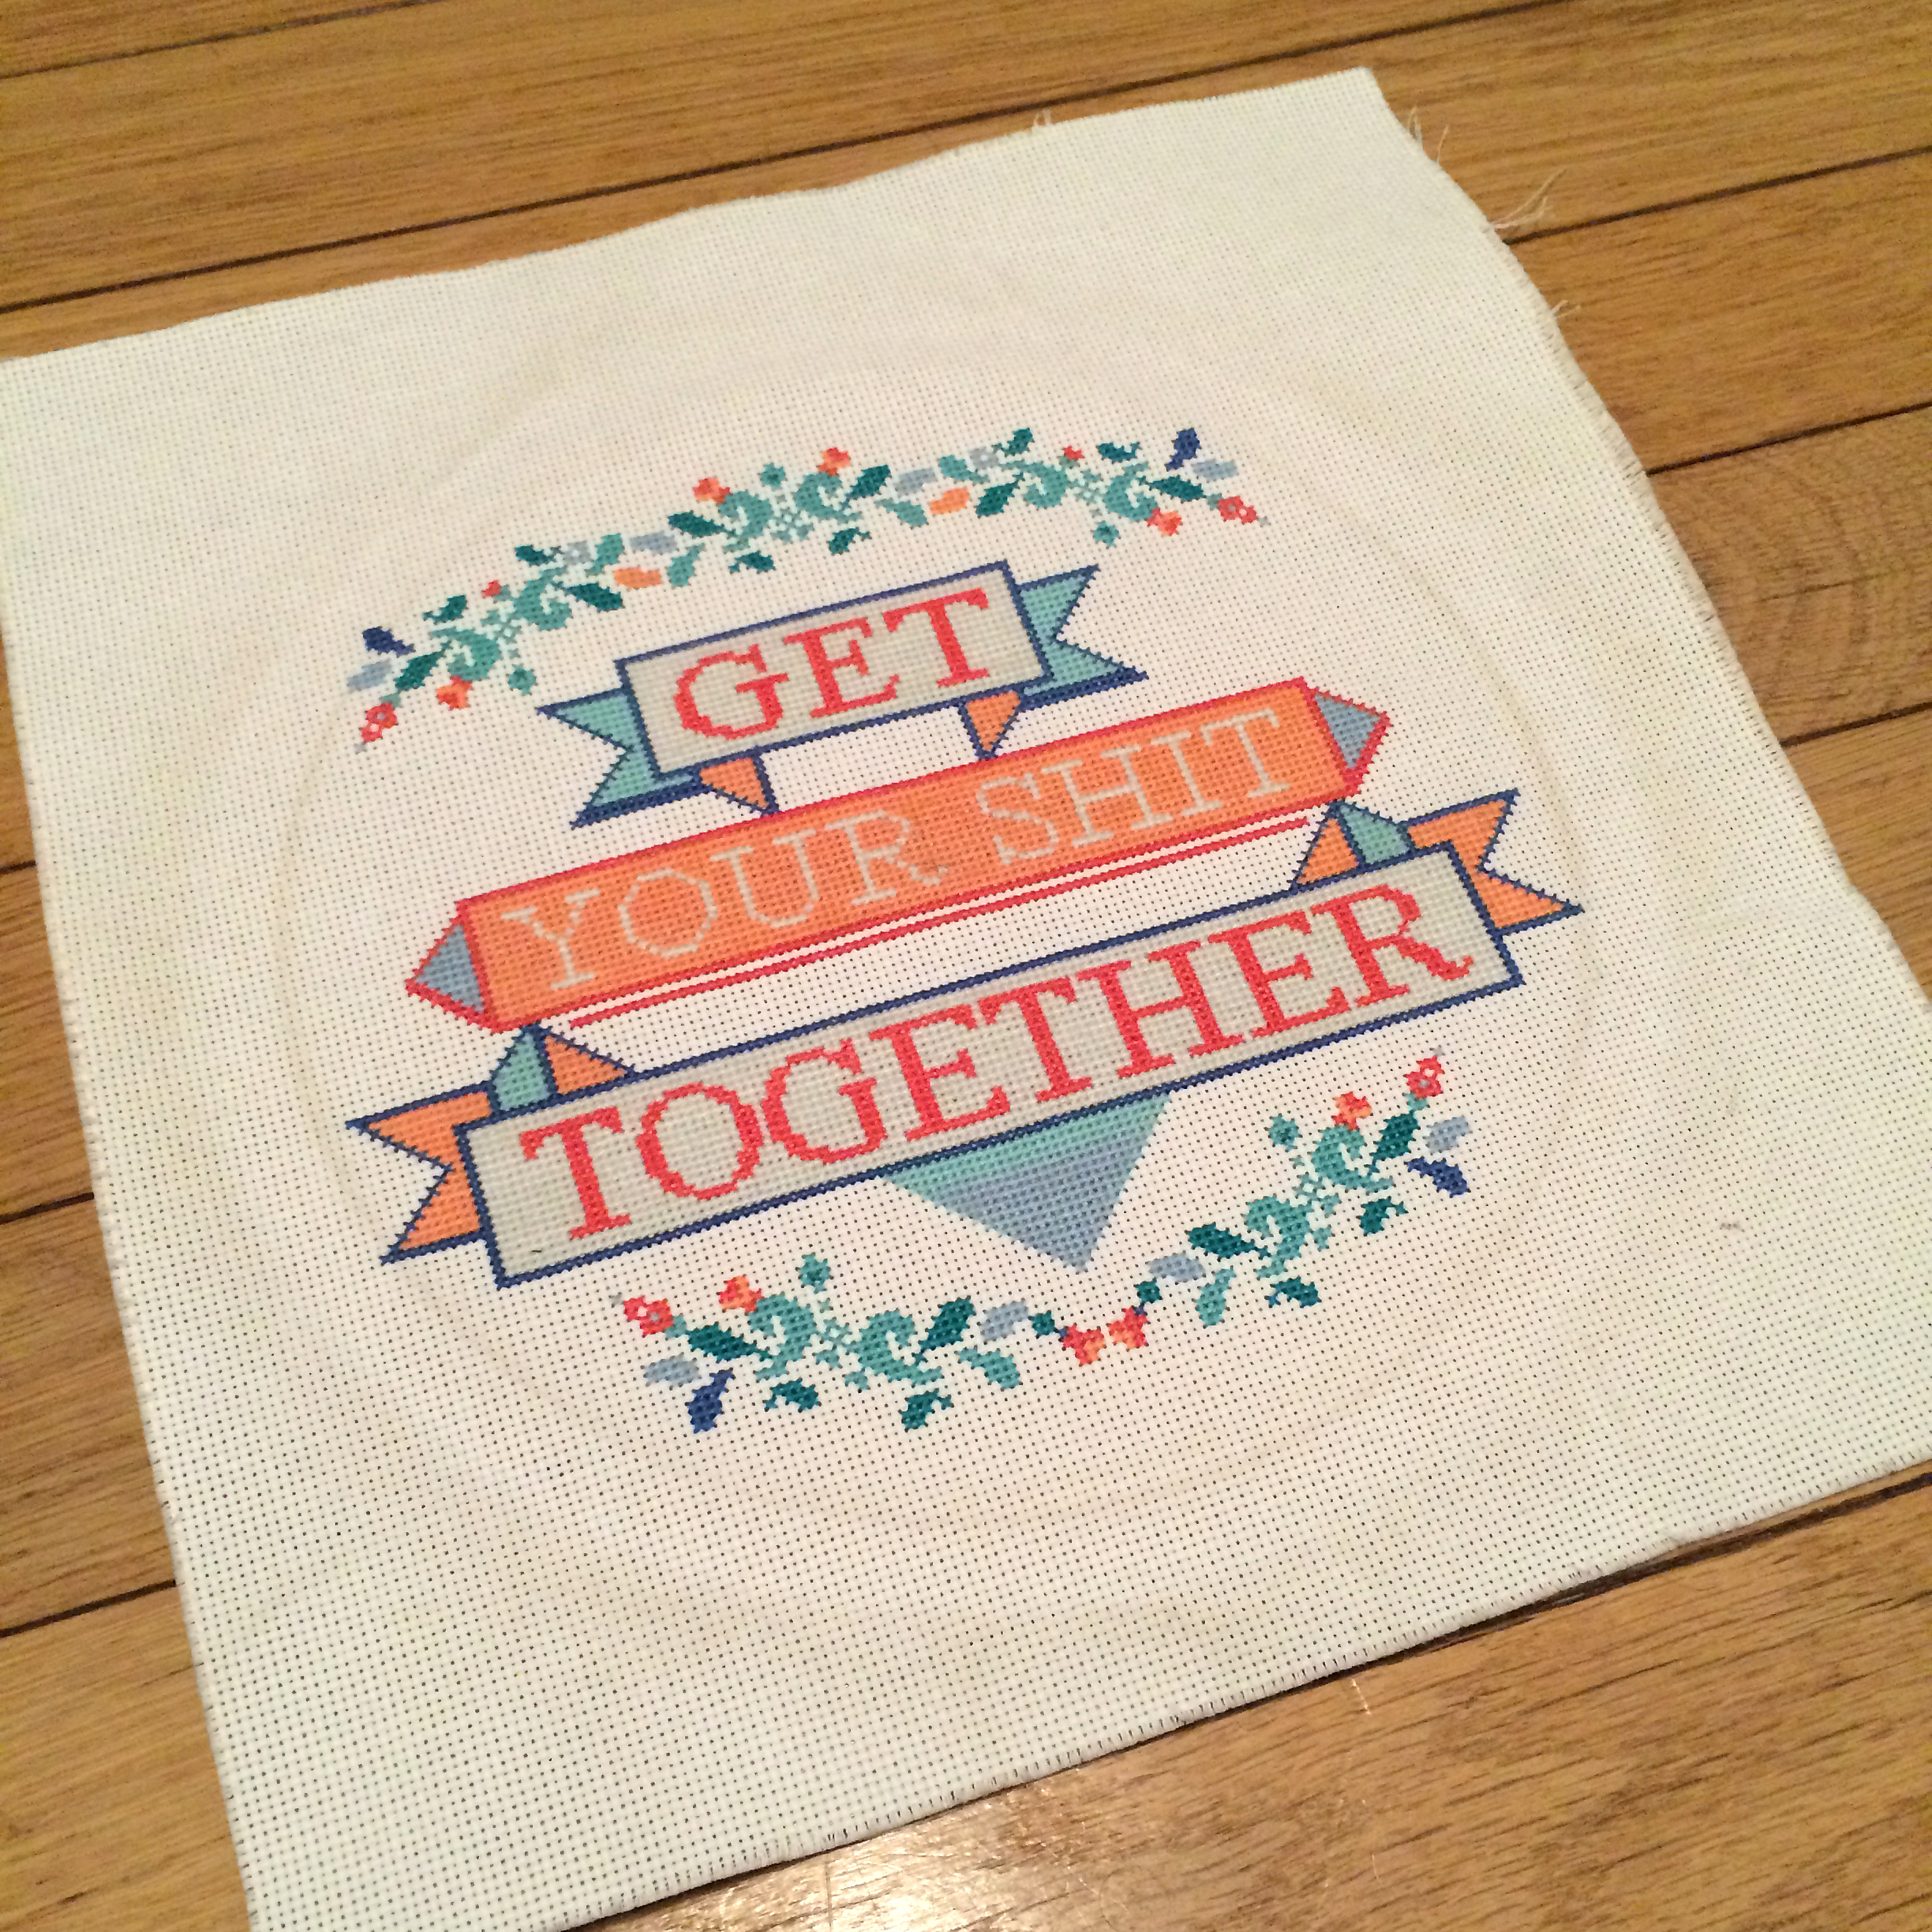 Cross-stitch project that says Get Your Shit Together